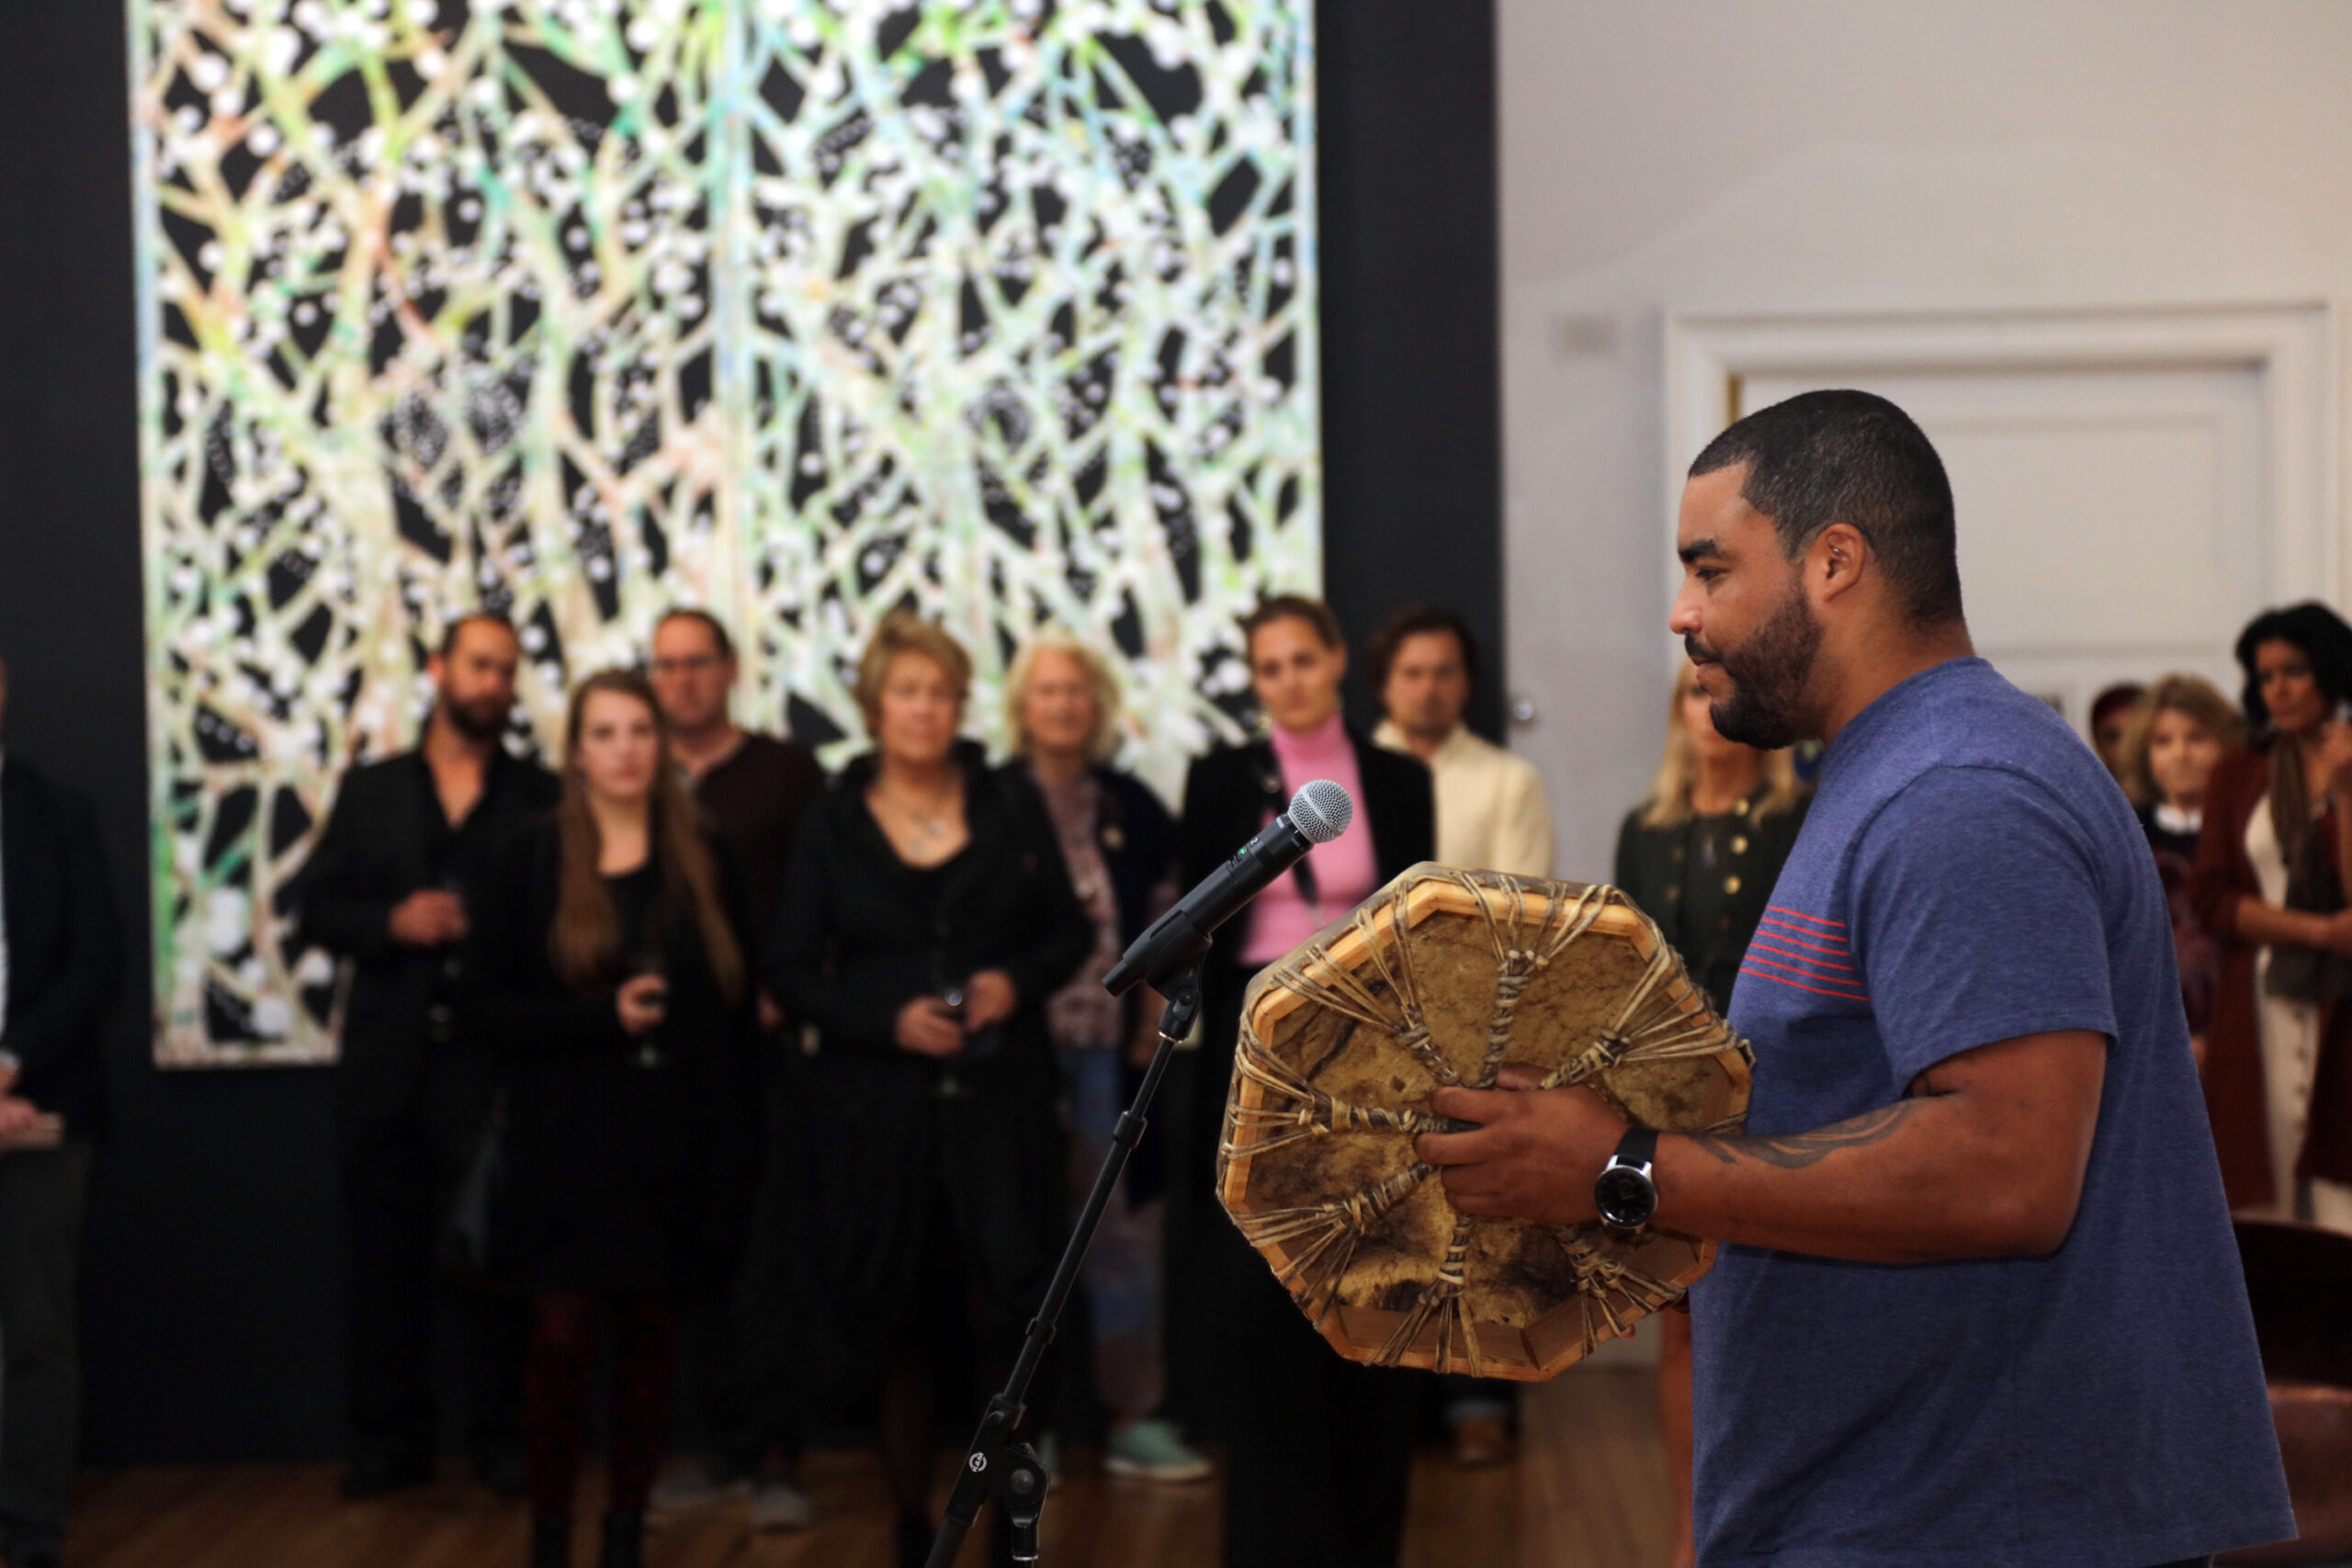 Shane Weeks performs the opening ceremony at the October 1 reception for 